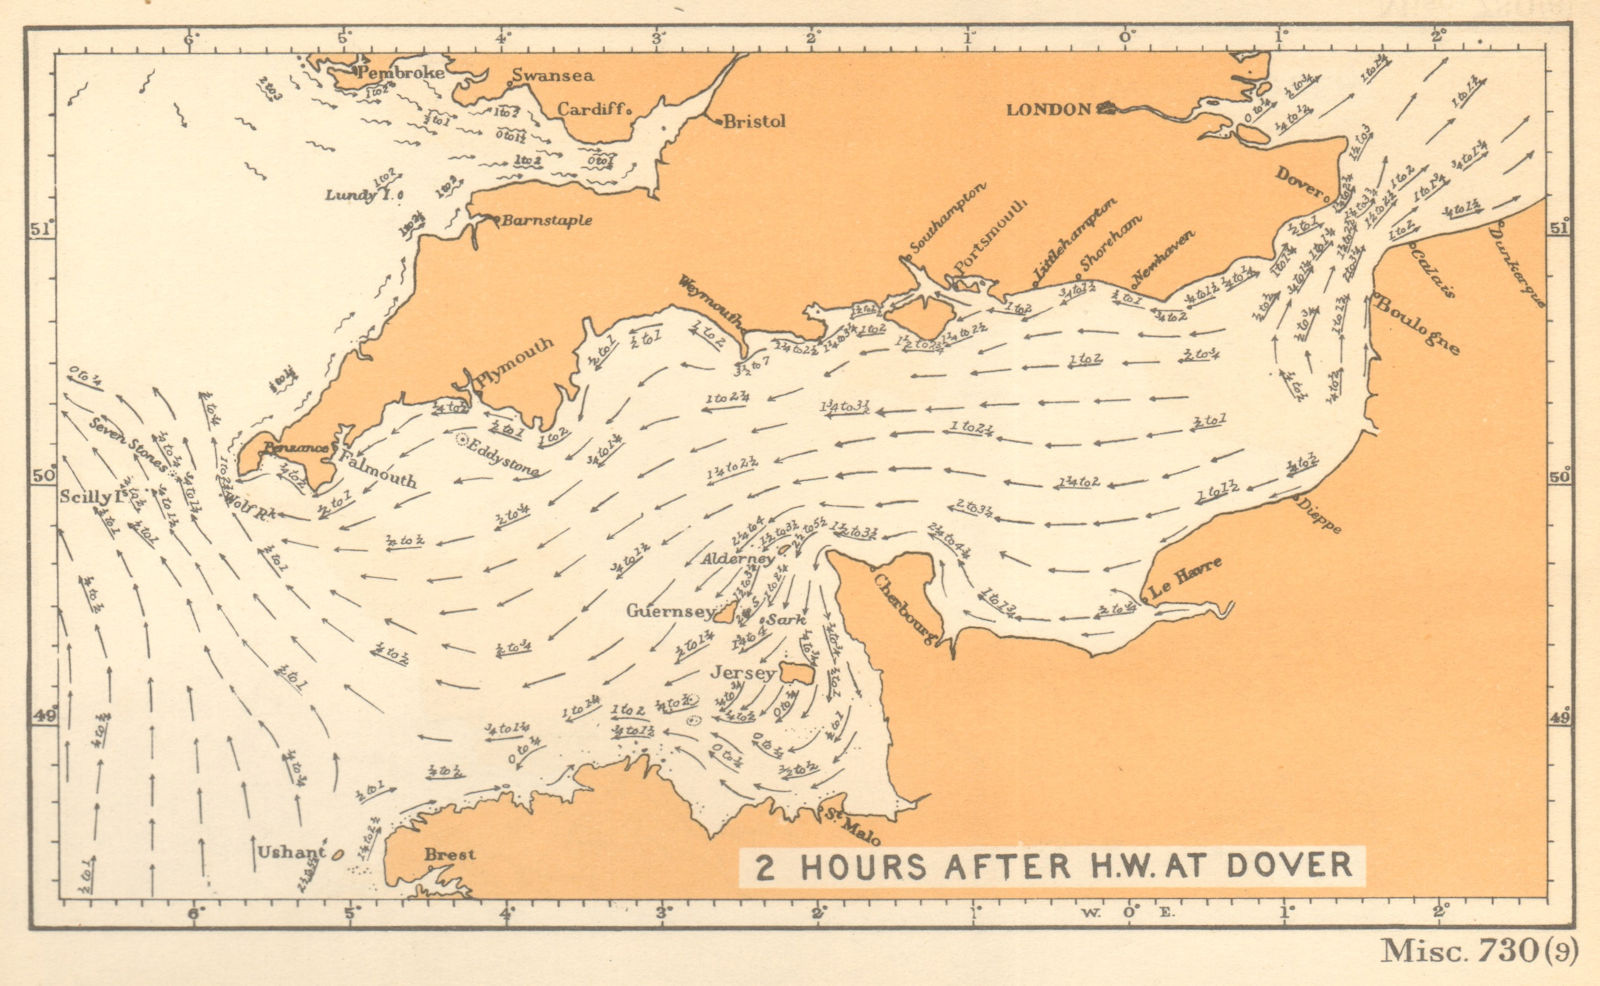 English Channel currents 2 hours after high water at Dover. ADMIRALTY 1943 map